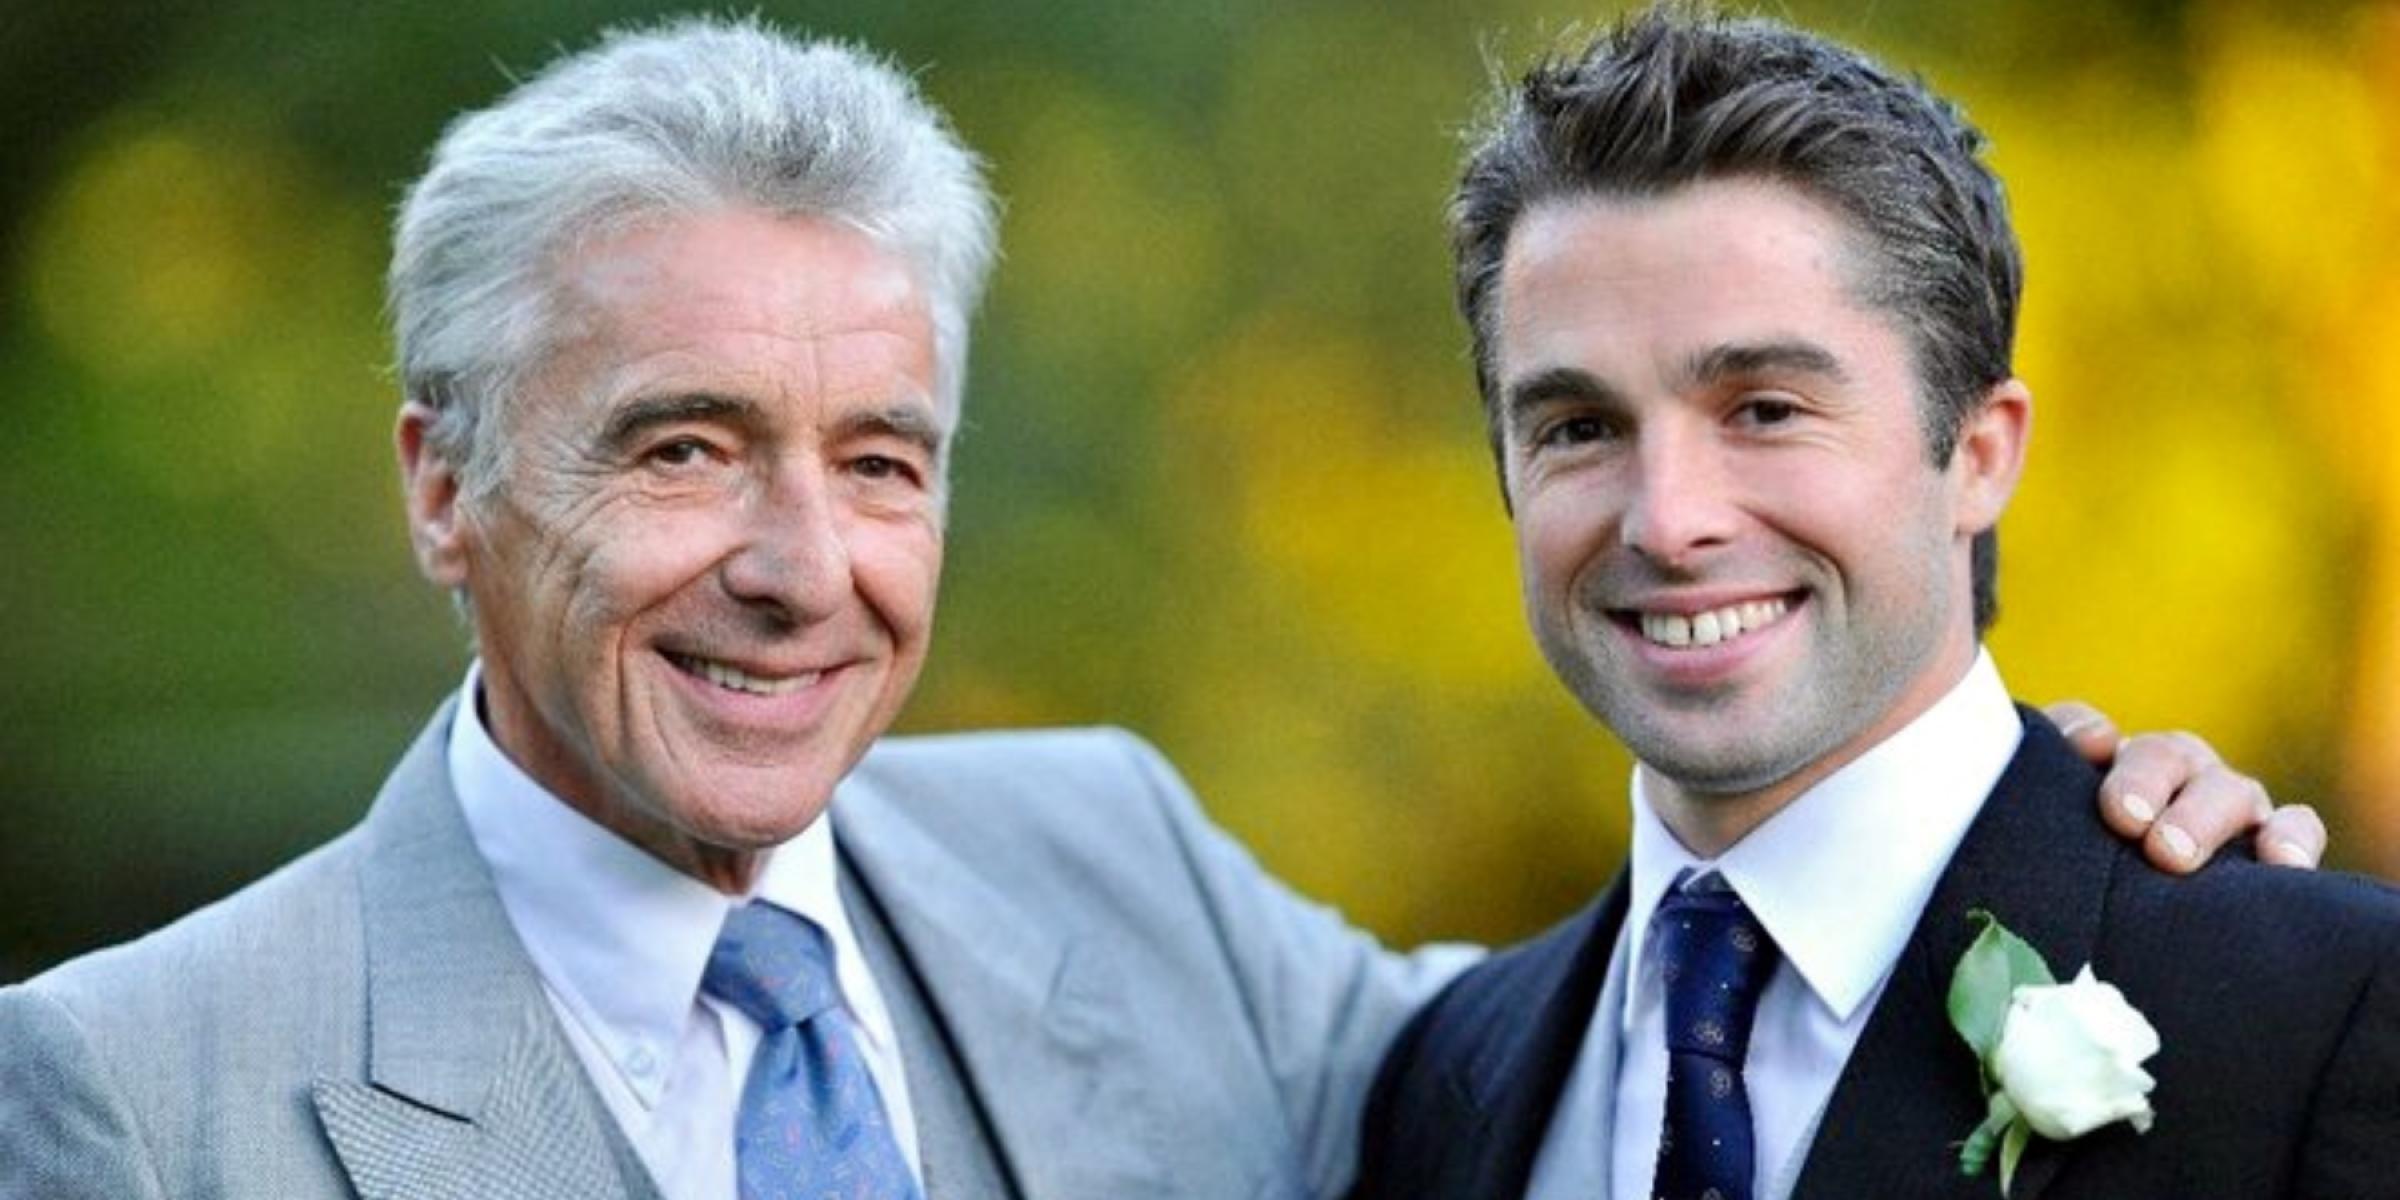 Charlie Starmer-Smith with his dad, both wearing suits at a wedding, and smiling